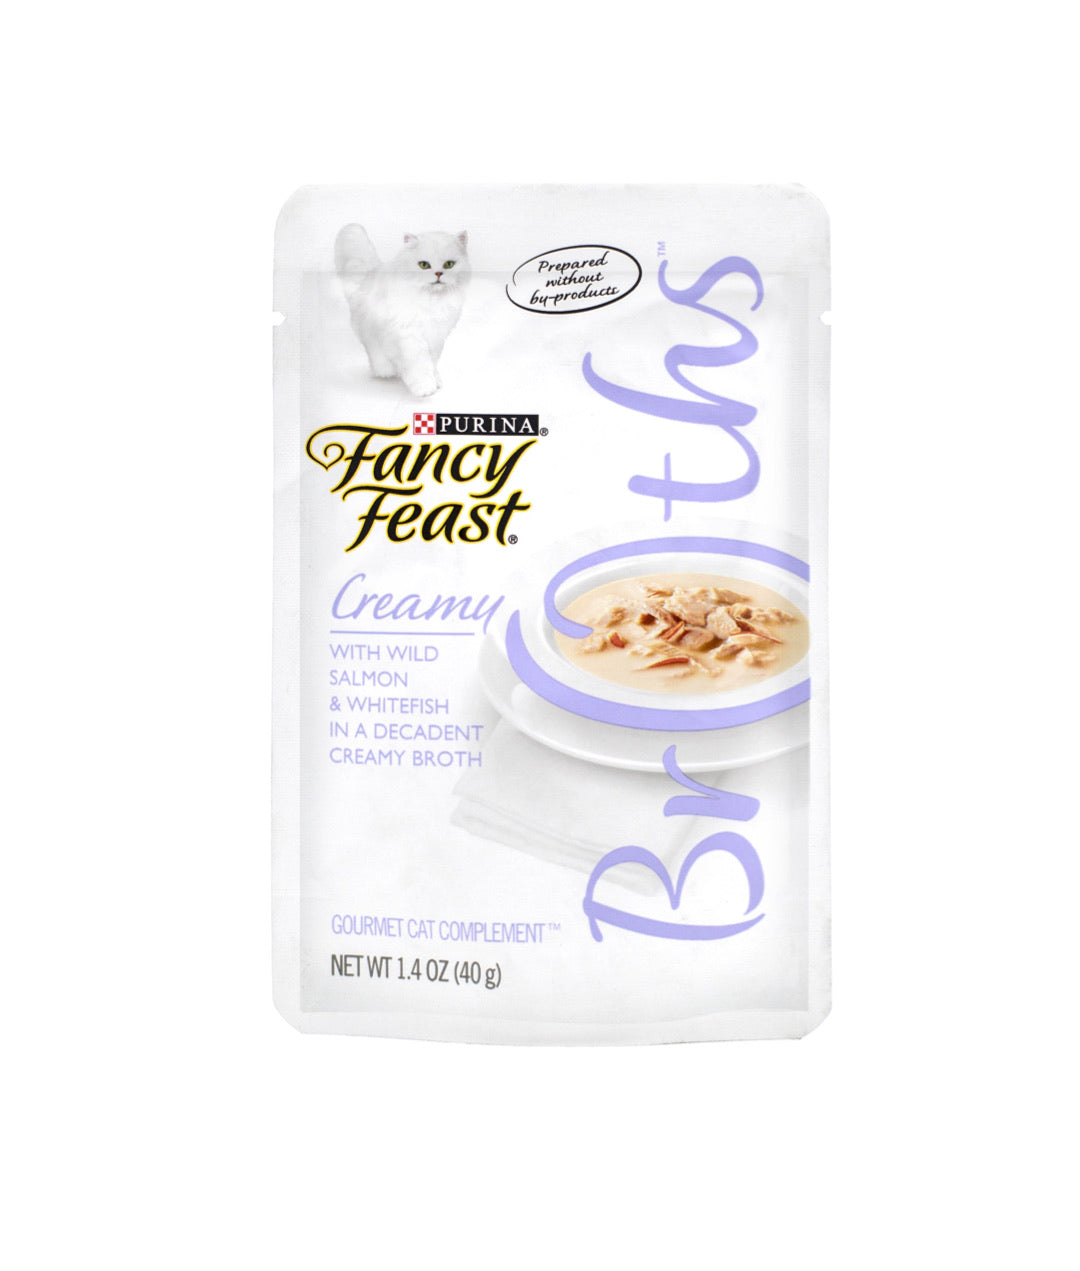 Fancy Feast Creamy Broths with Wild Salmon & Whitefish in a Decadent Creamy Broth (40g)